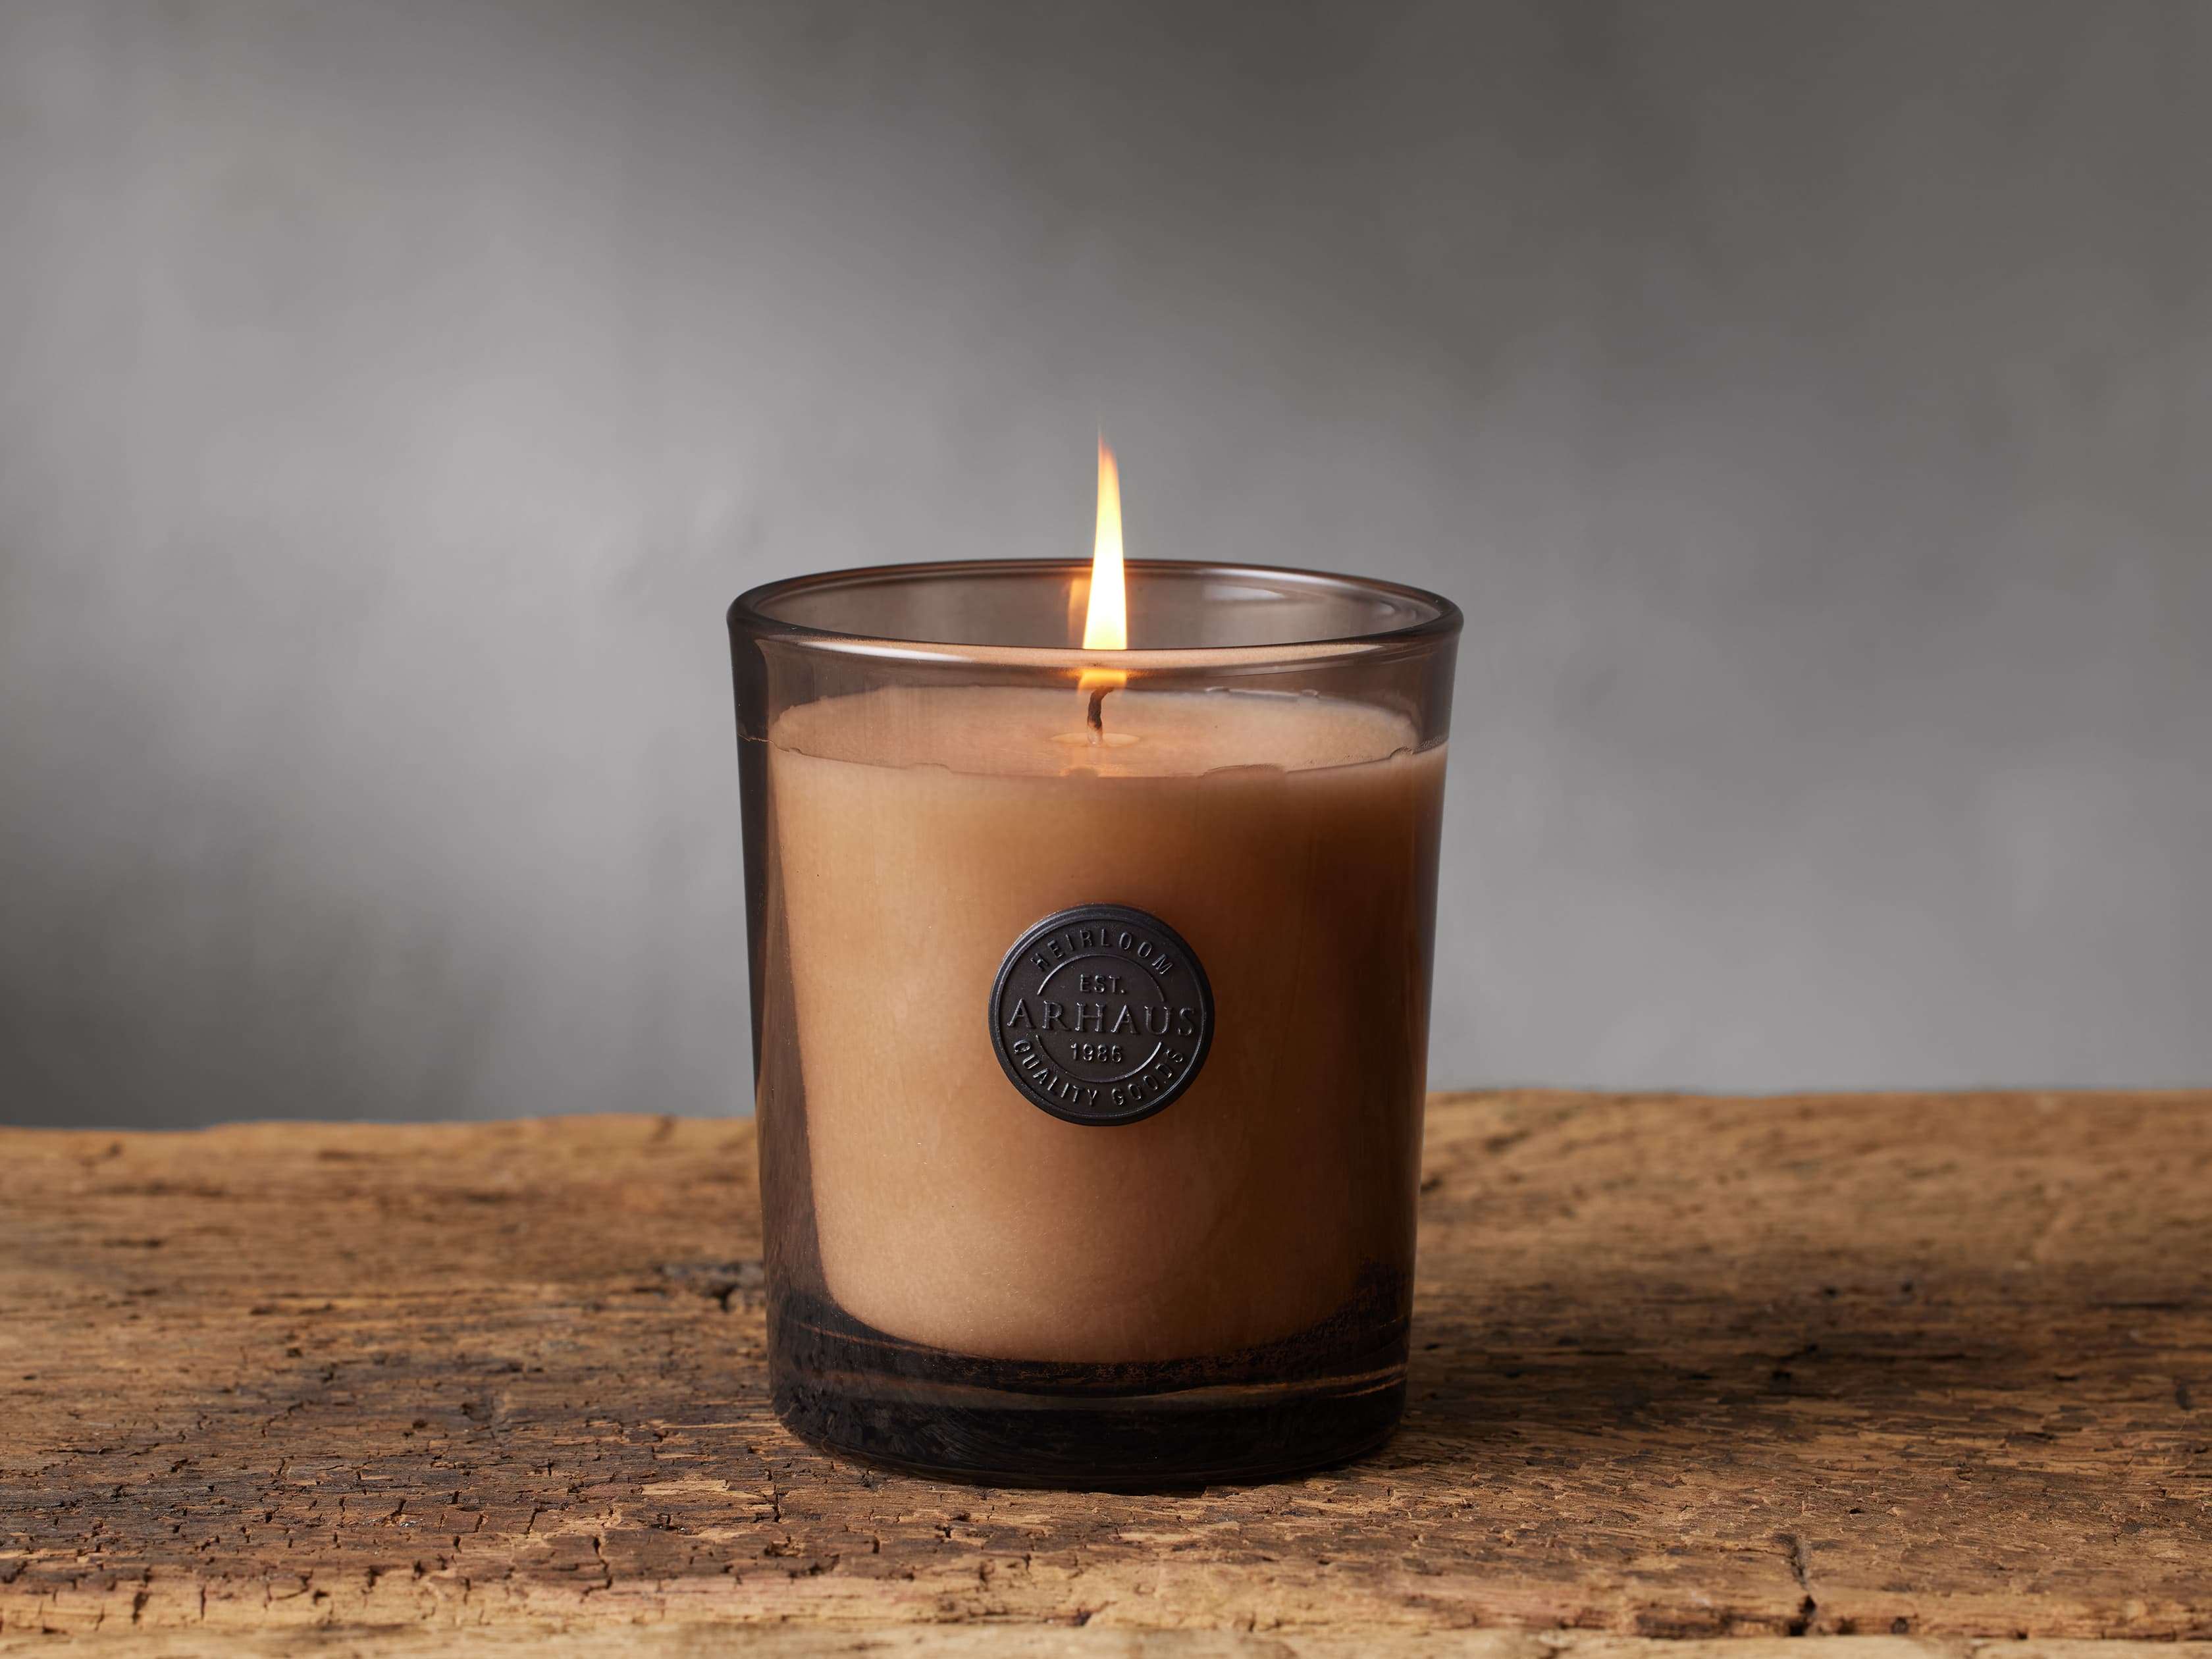 Shop Signature Candle in Sandalwood Leaf and Tobacco | Quantity: 1 from Arhaus on Openhaus